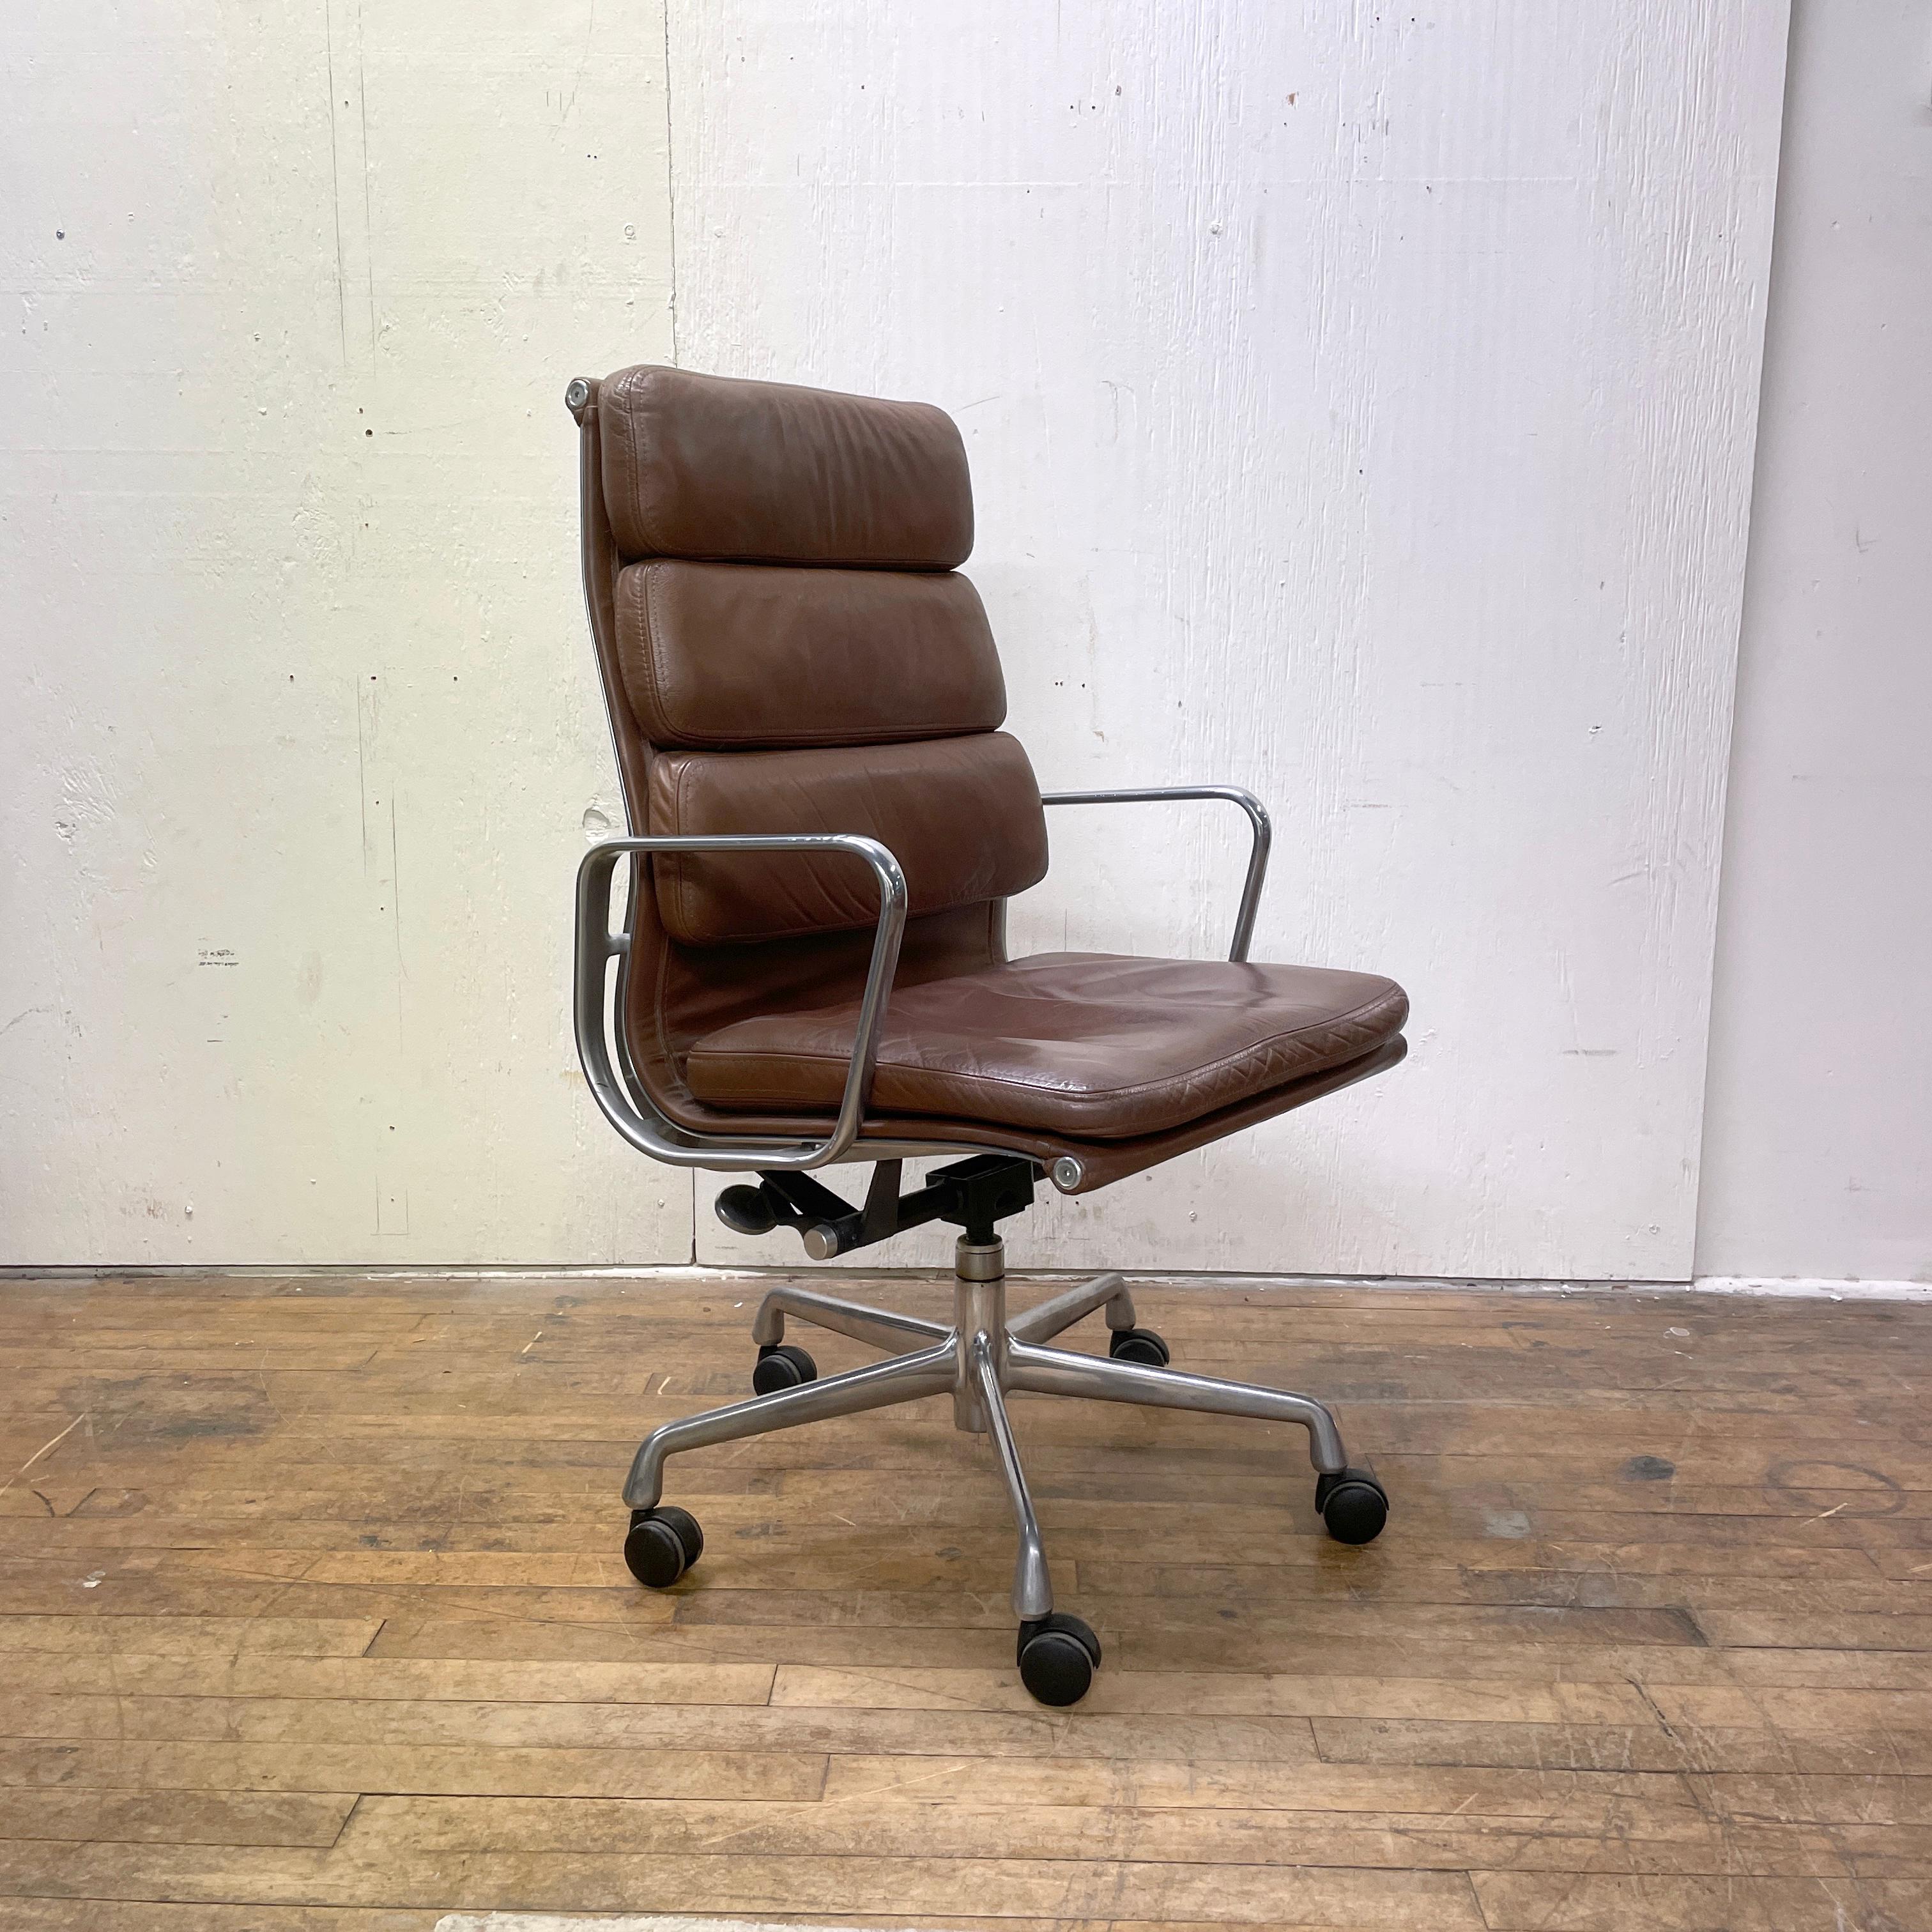 A super comfortable vintage softpad chair by Charles and Ray Eames for Herman Miller. The chair is upholstered in brown leather and has a five-star wheeled base. Rocks and swivels smoothly. The chair is in very good vintage condition with no rips or